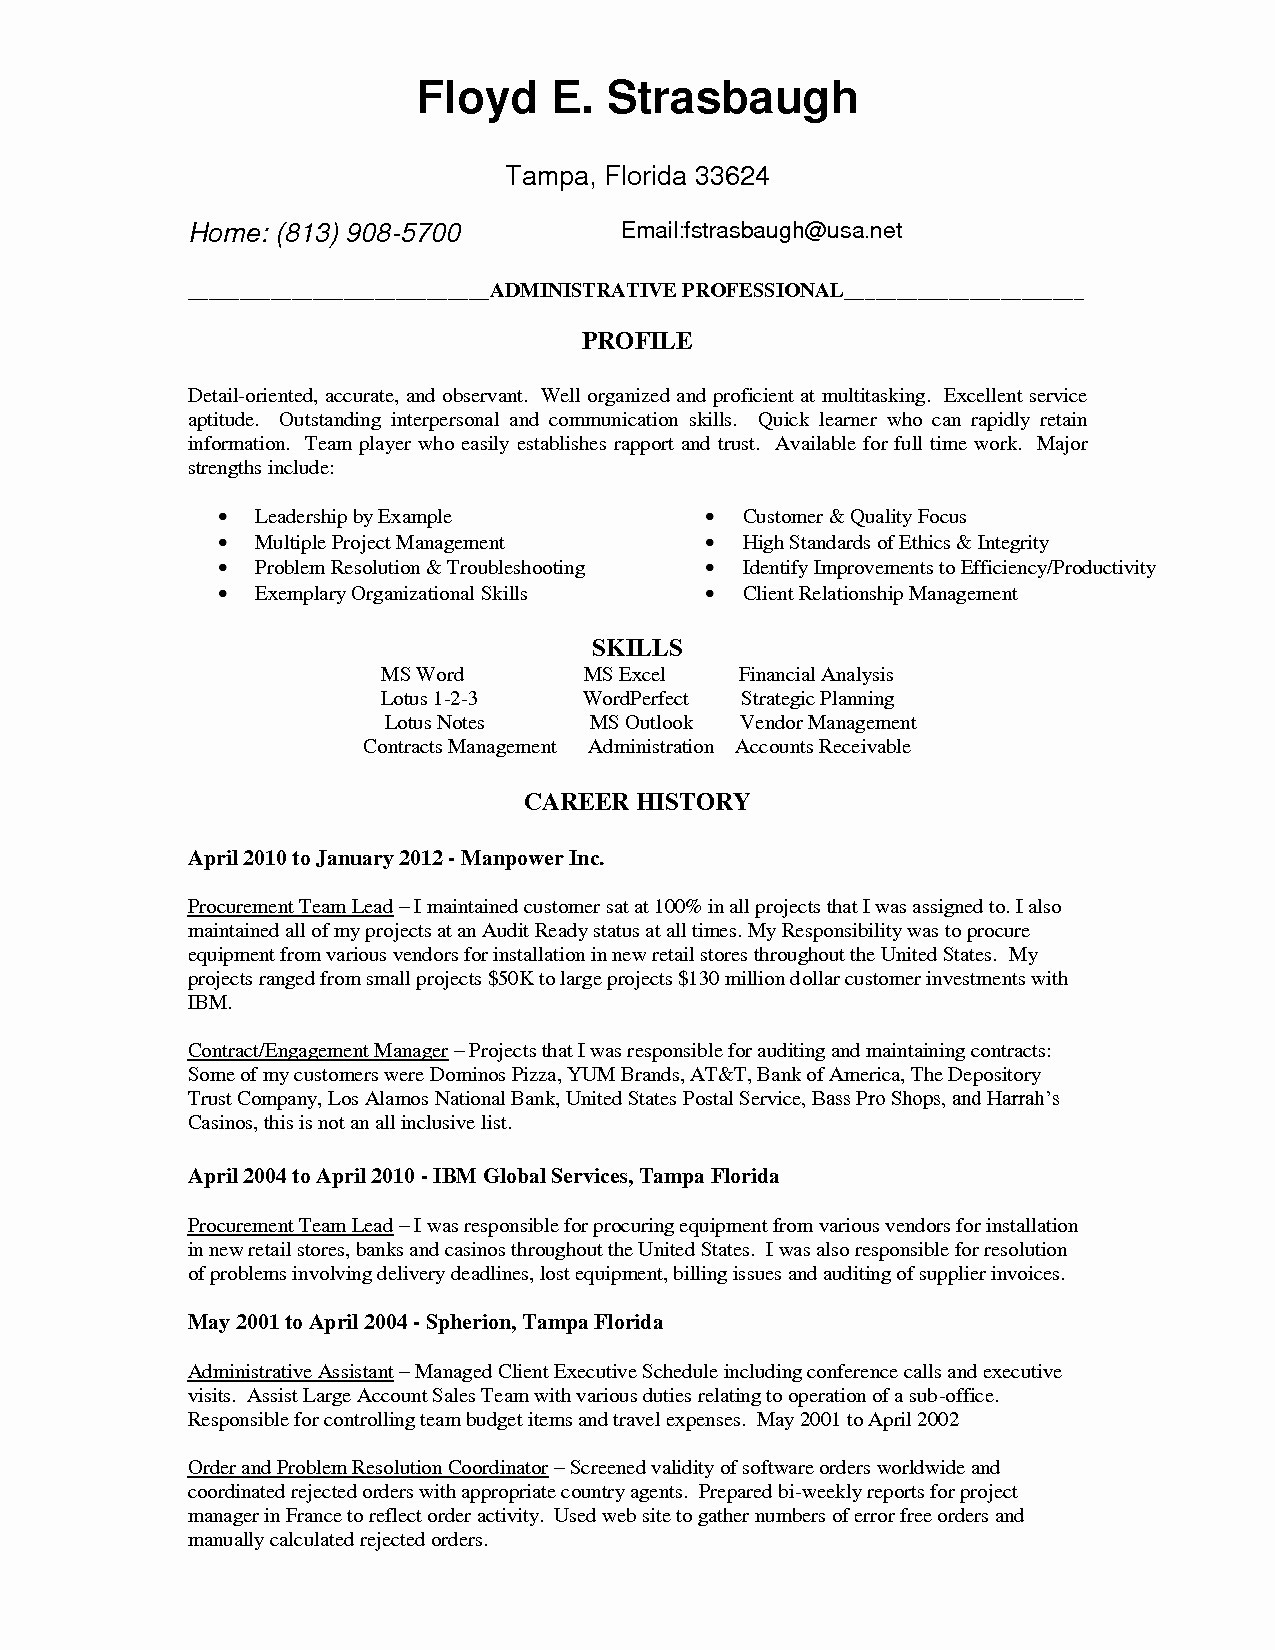 Cover Letter Template Word - â Free Microsoft Word Resume Templates Awesome Professional Job